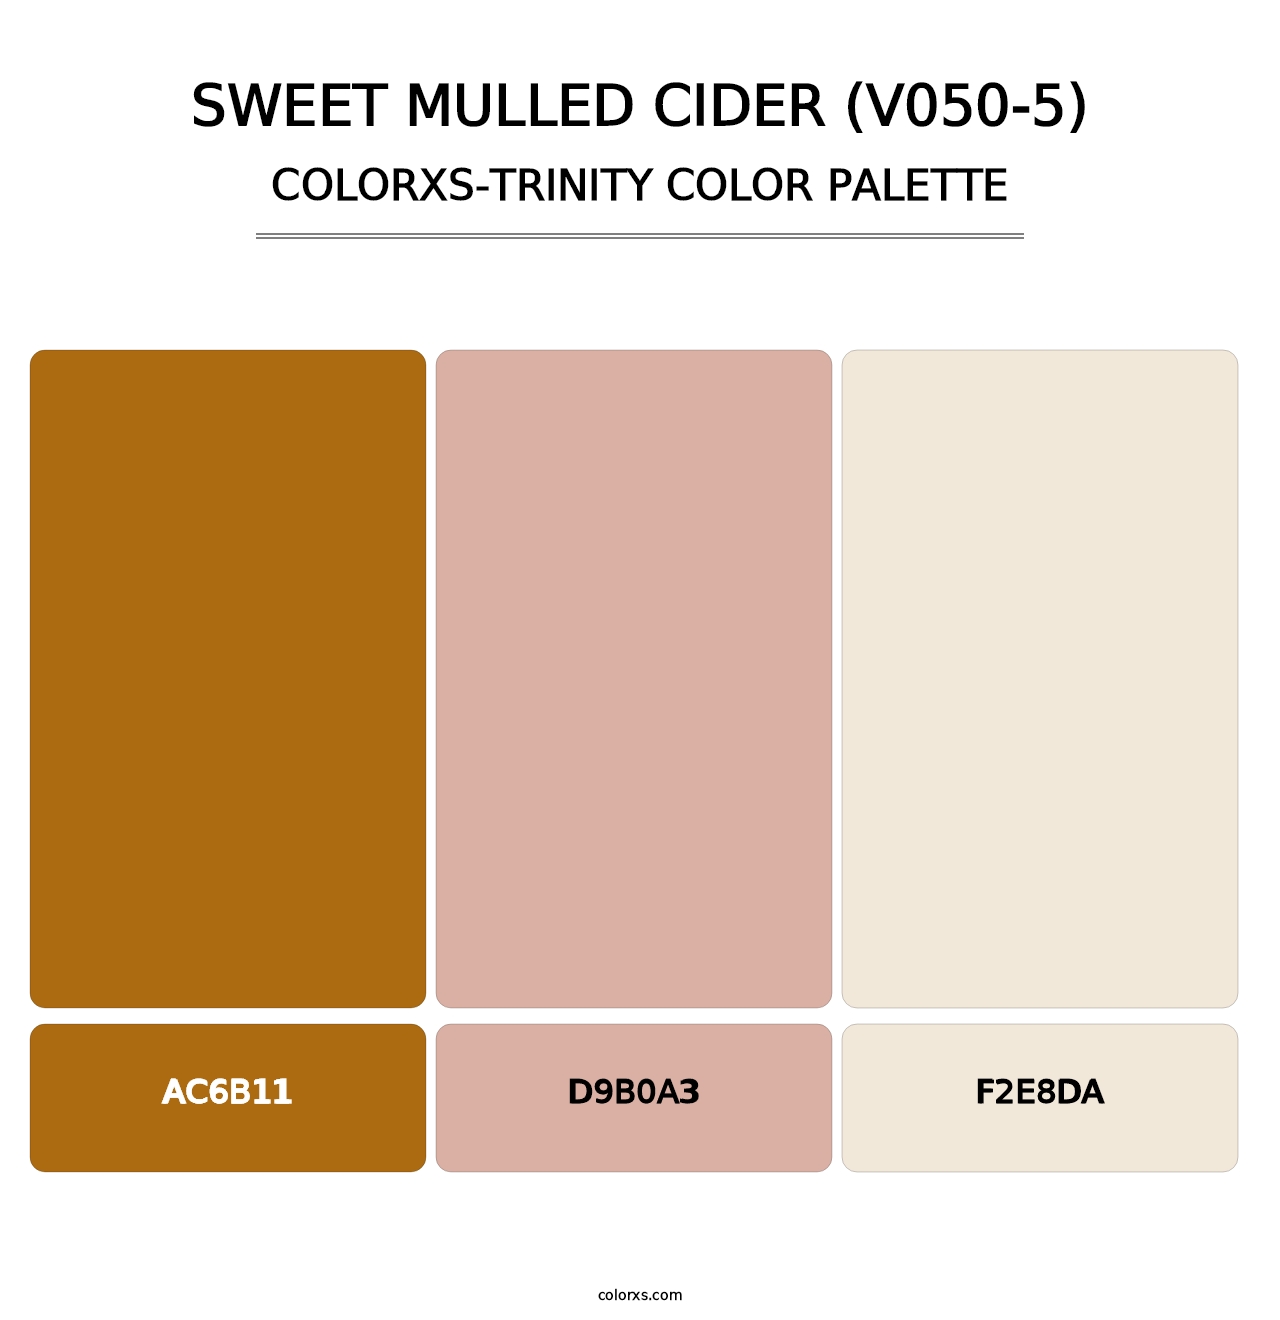 Sweet Mulled Cider (V050-5) - Colorxs Trinity Palette